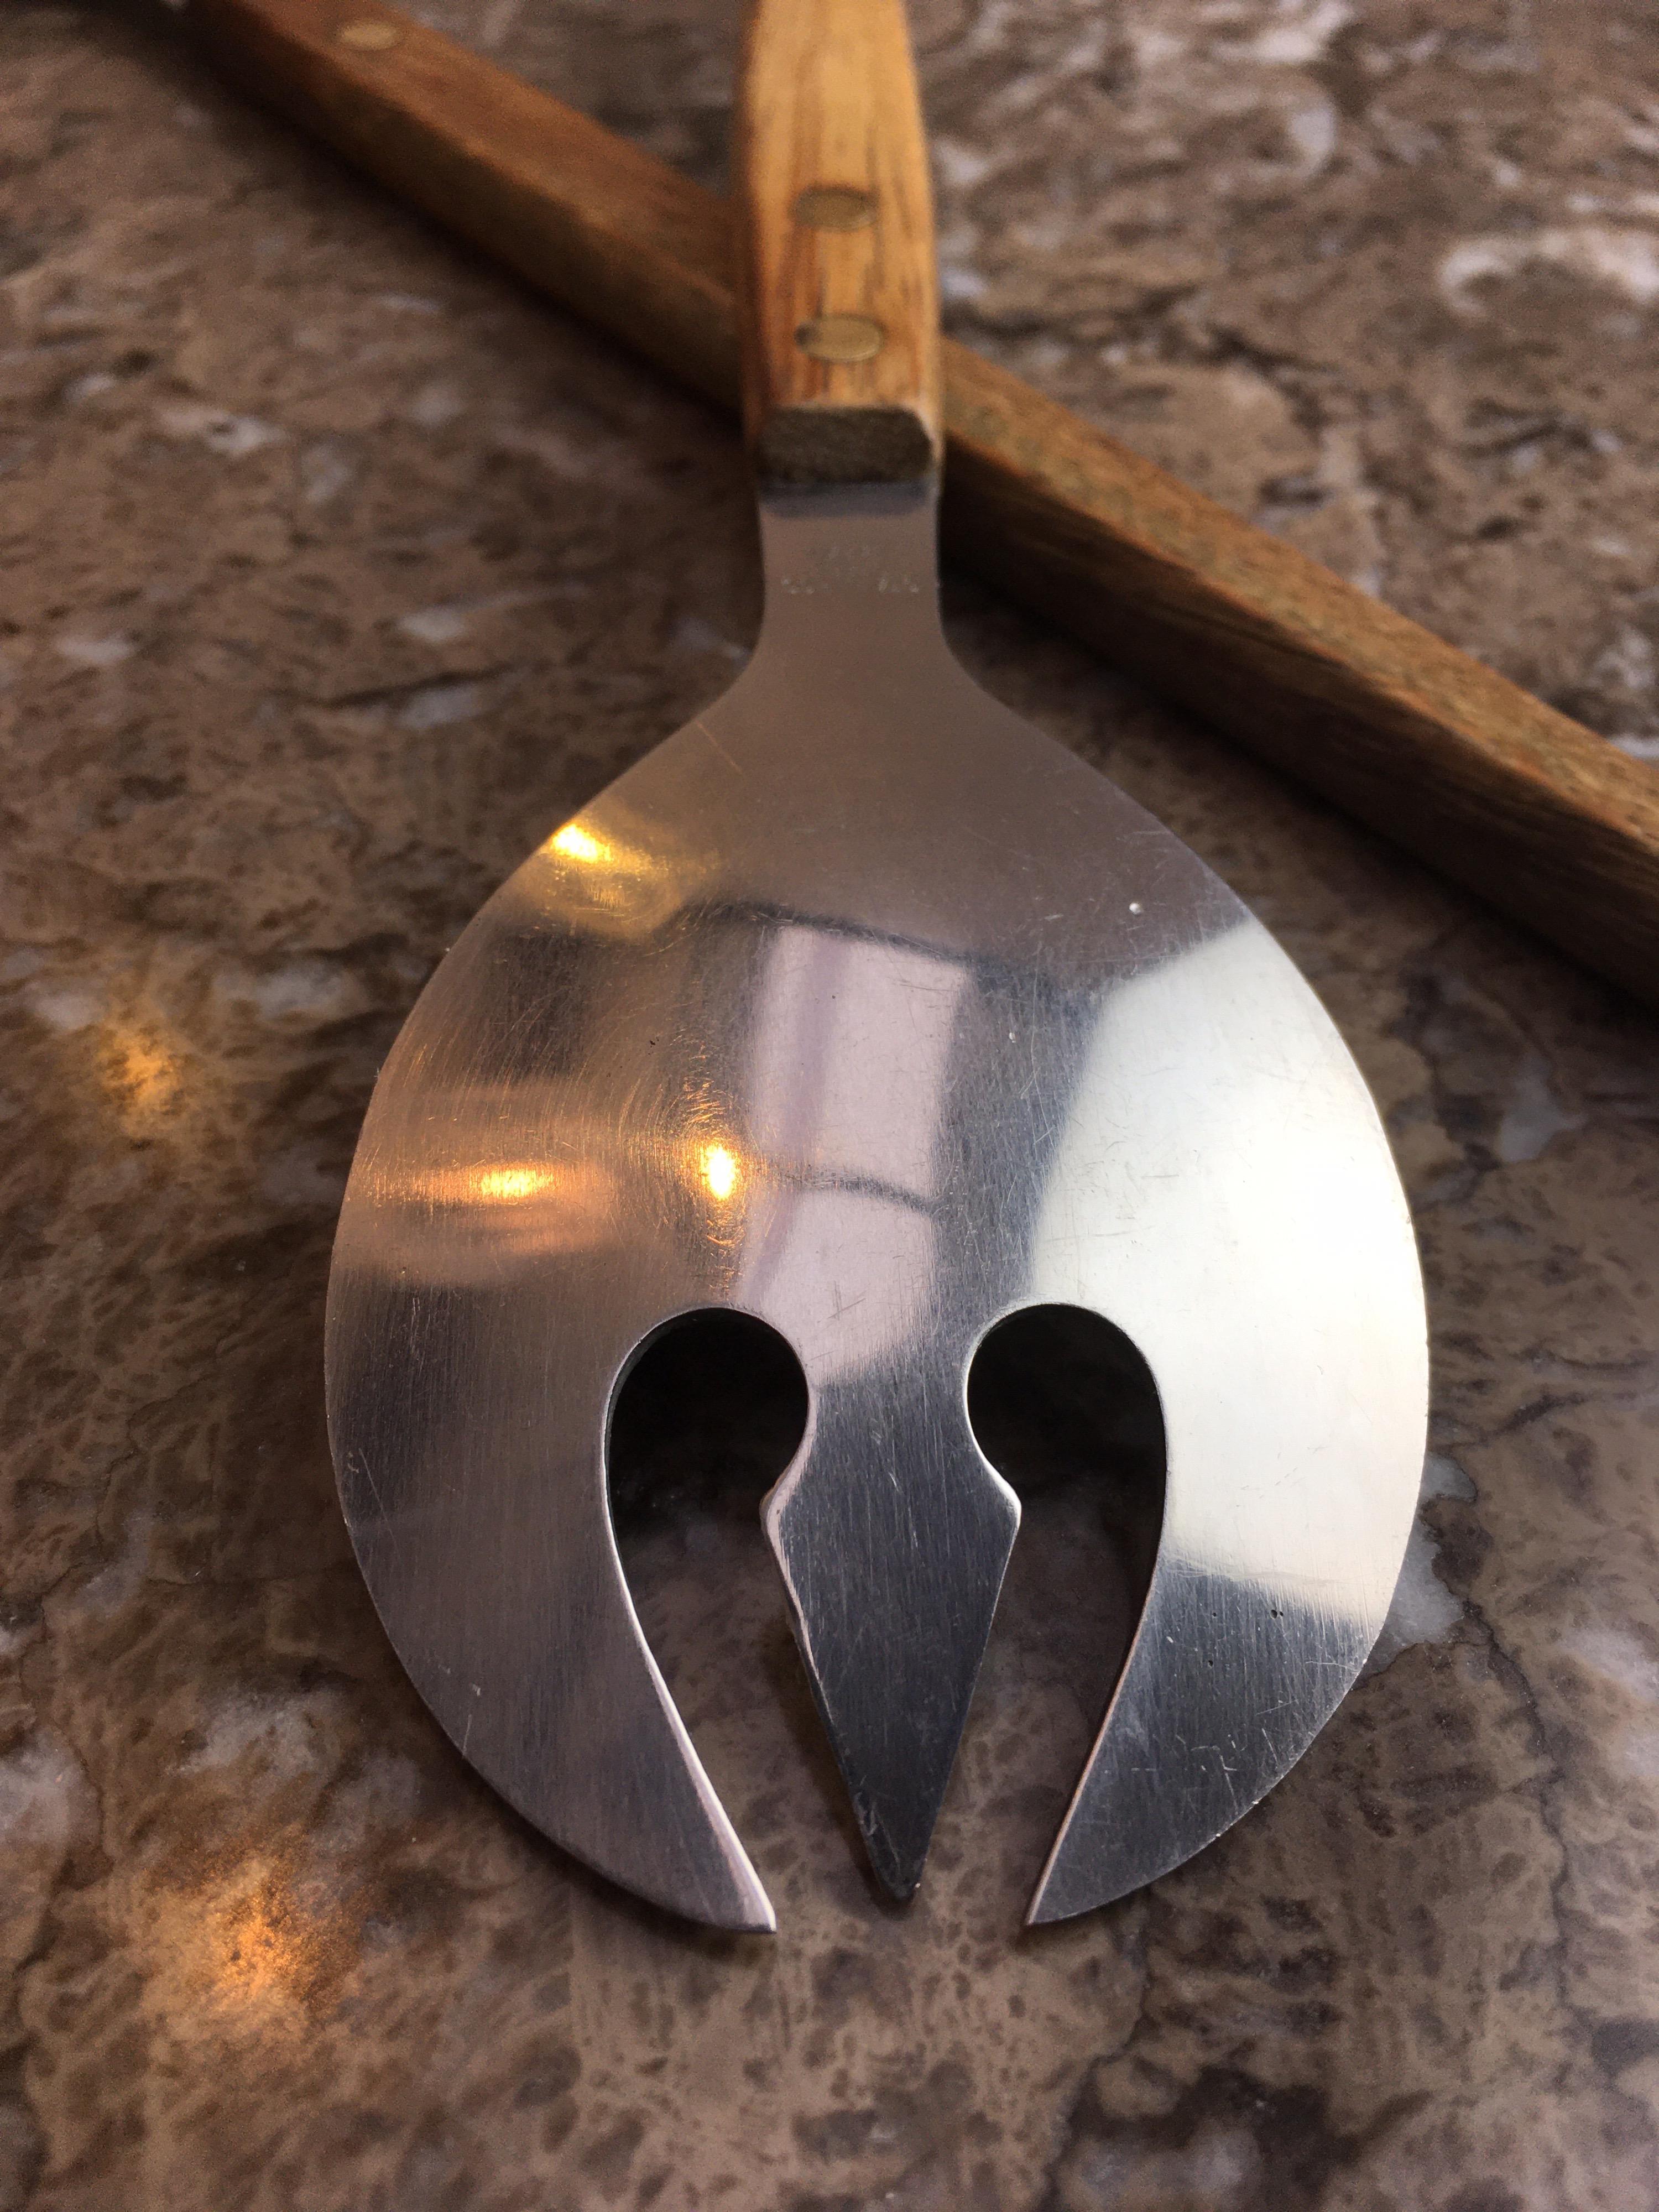 A tidy pair of salad servers with long handles made of teak. Polished brass studs show through for added character.

We love these for their honesty and simplicity and for the fanciful little ‘Neptune’s trident’ shape in the salad fork. 

Expect